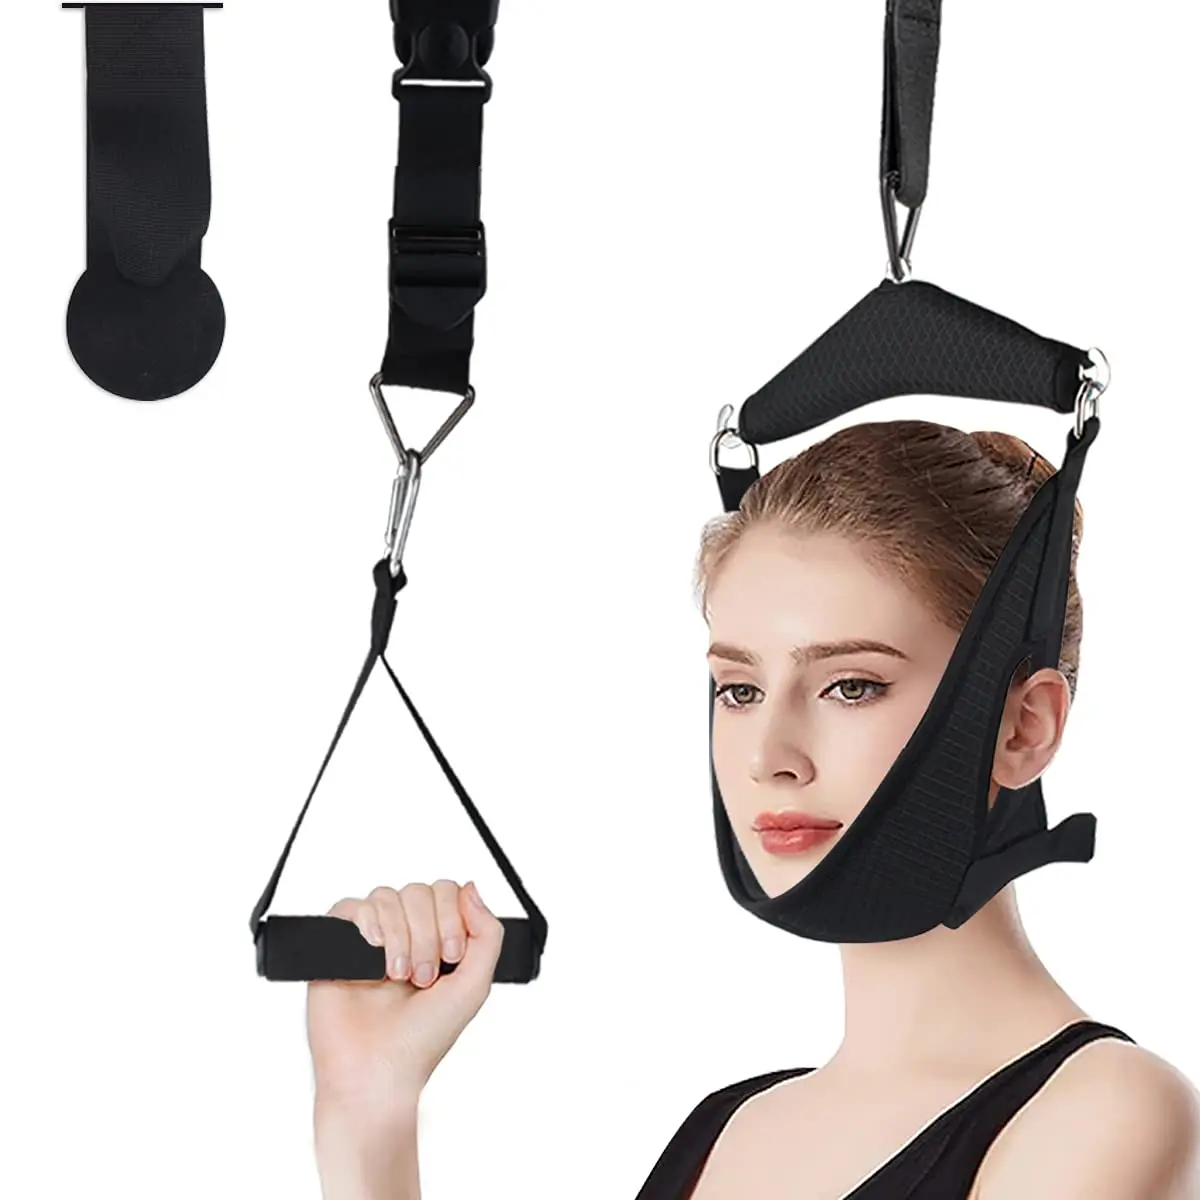 Cervical Neck Traction Device, Portable Neck Decompression Devices Door Traction Stretcher。